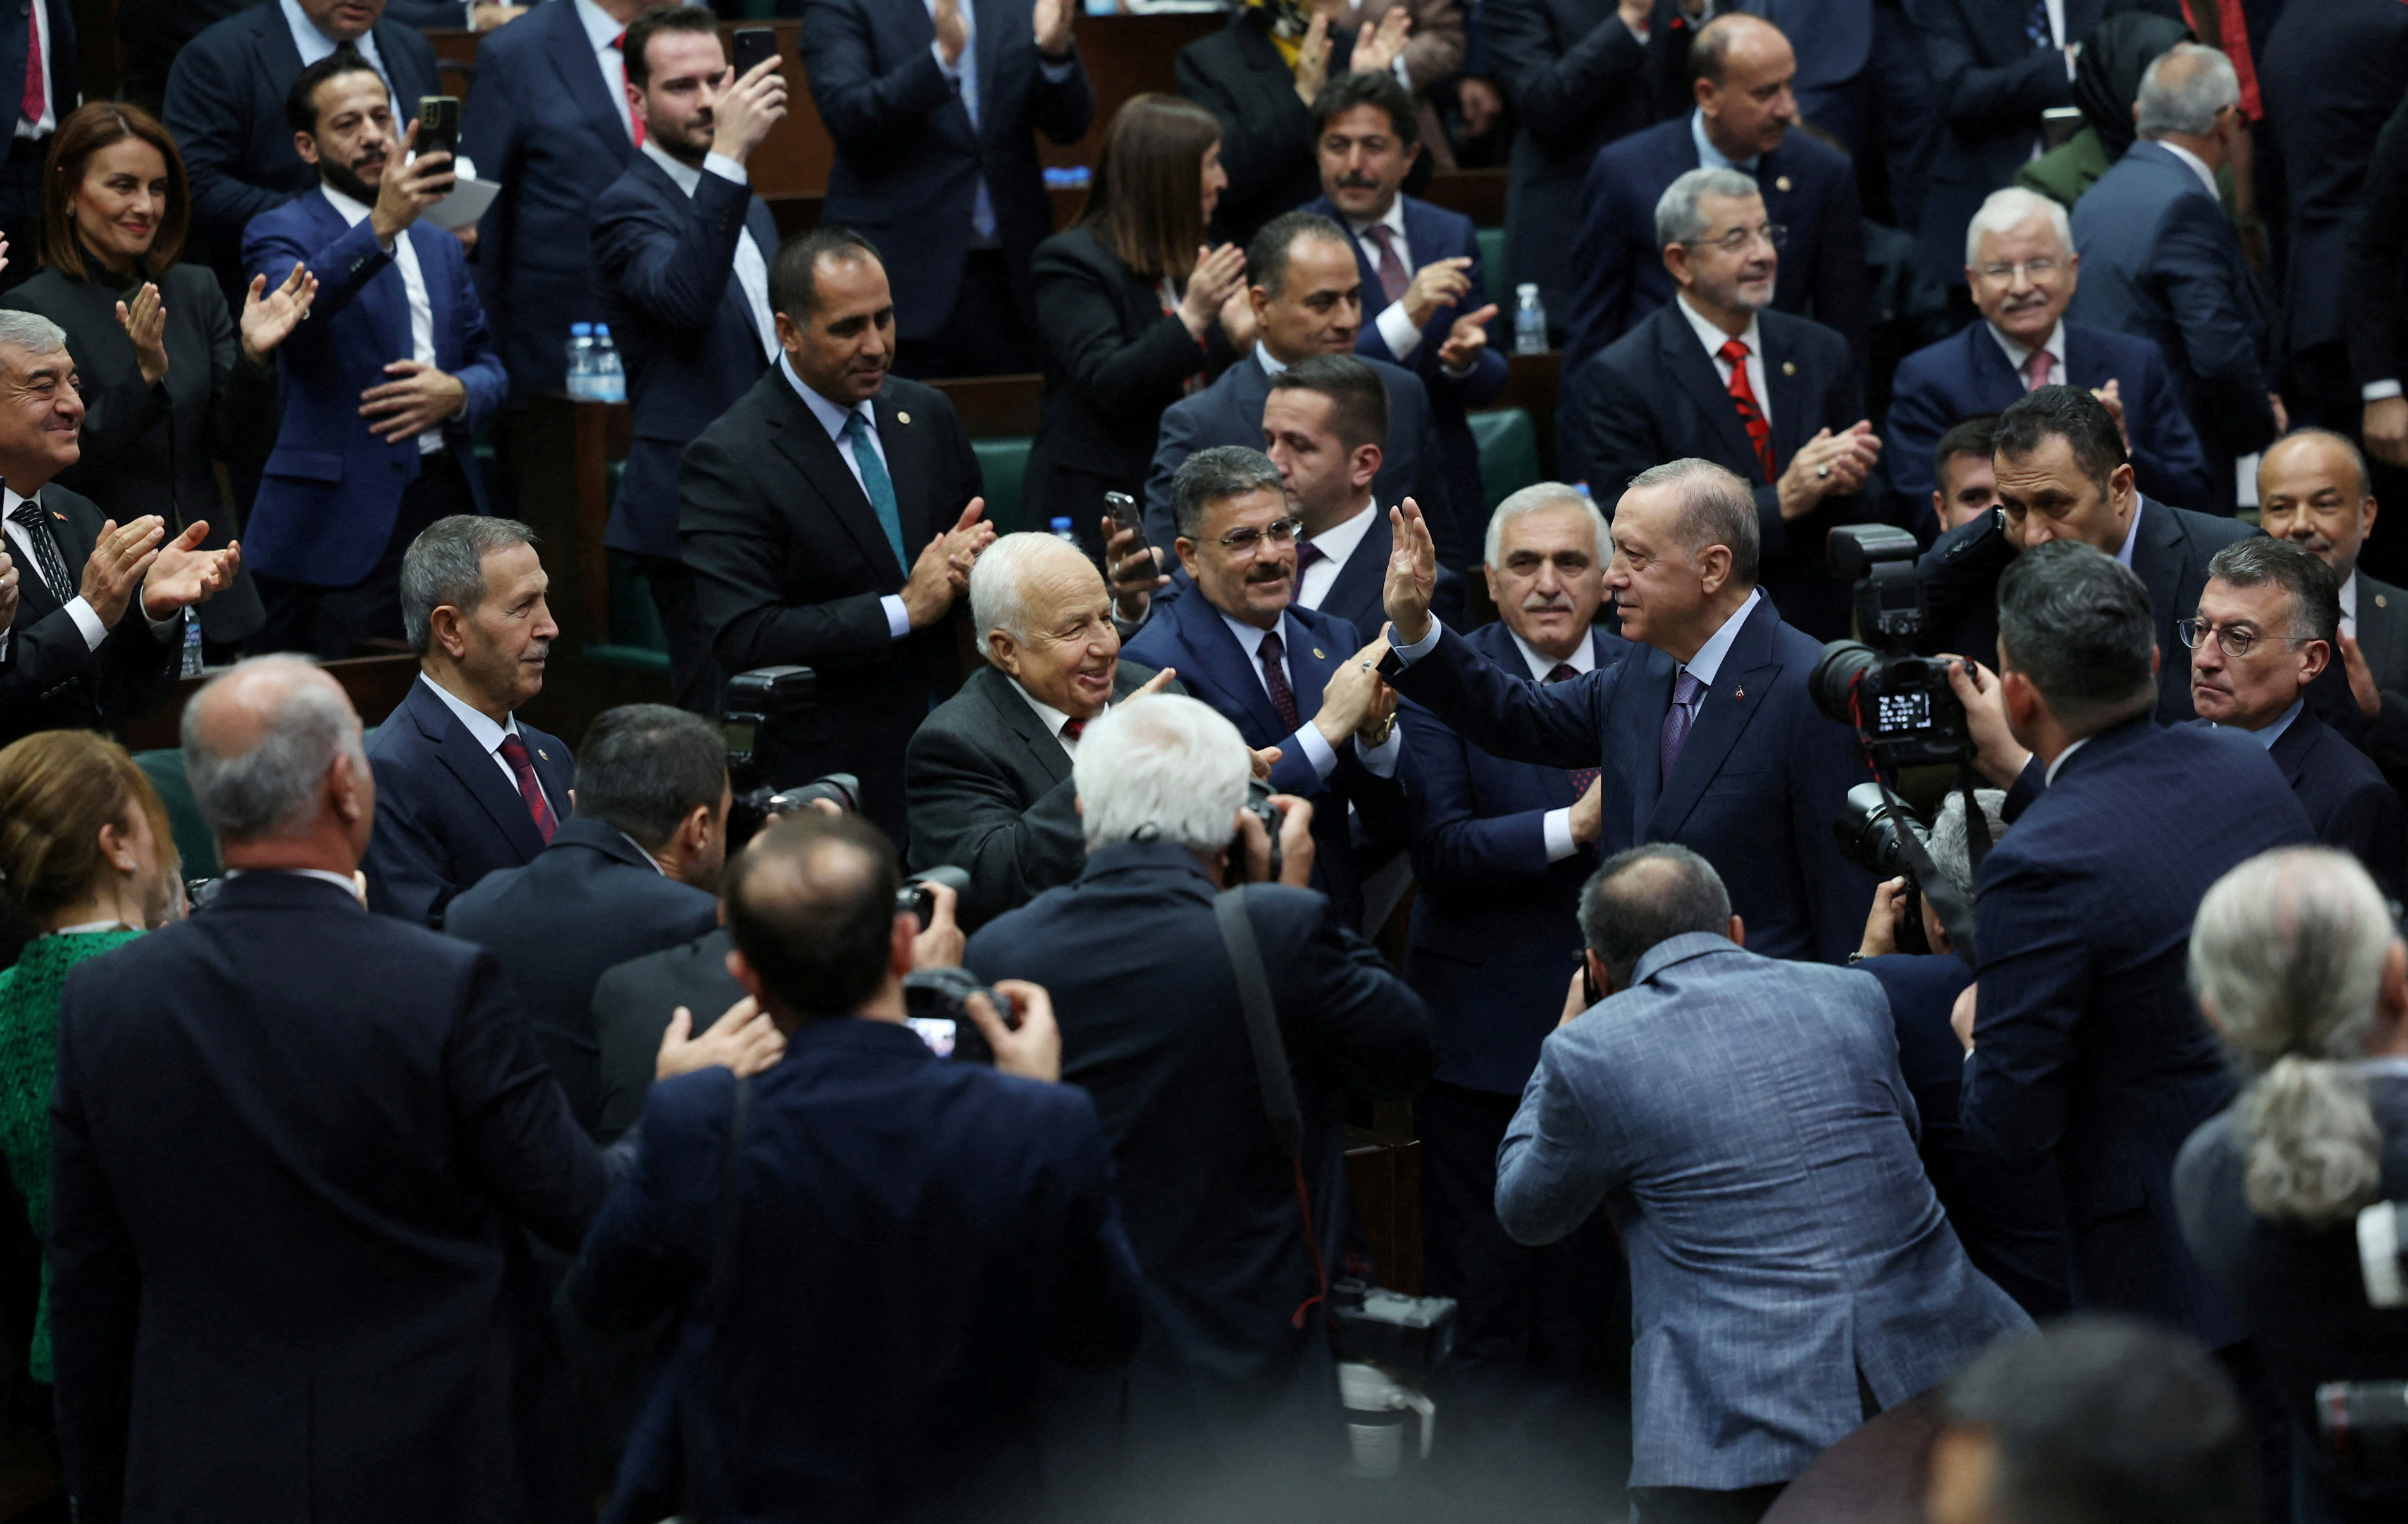 Turkish President Tayyip Erdogan greets lawmakers of his AK Party t in the Turkish parliament in Ankara